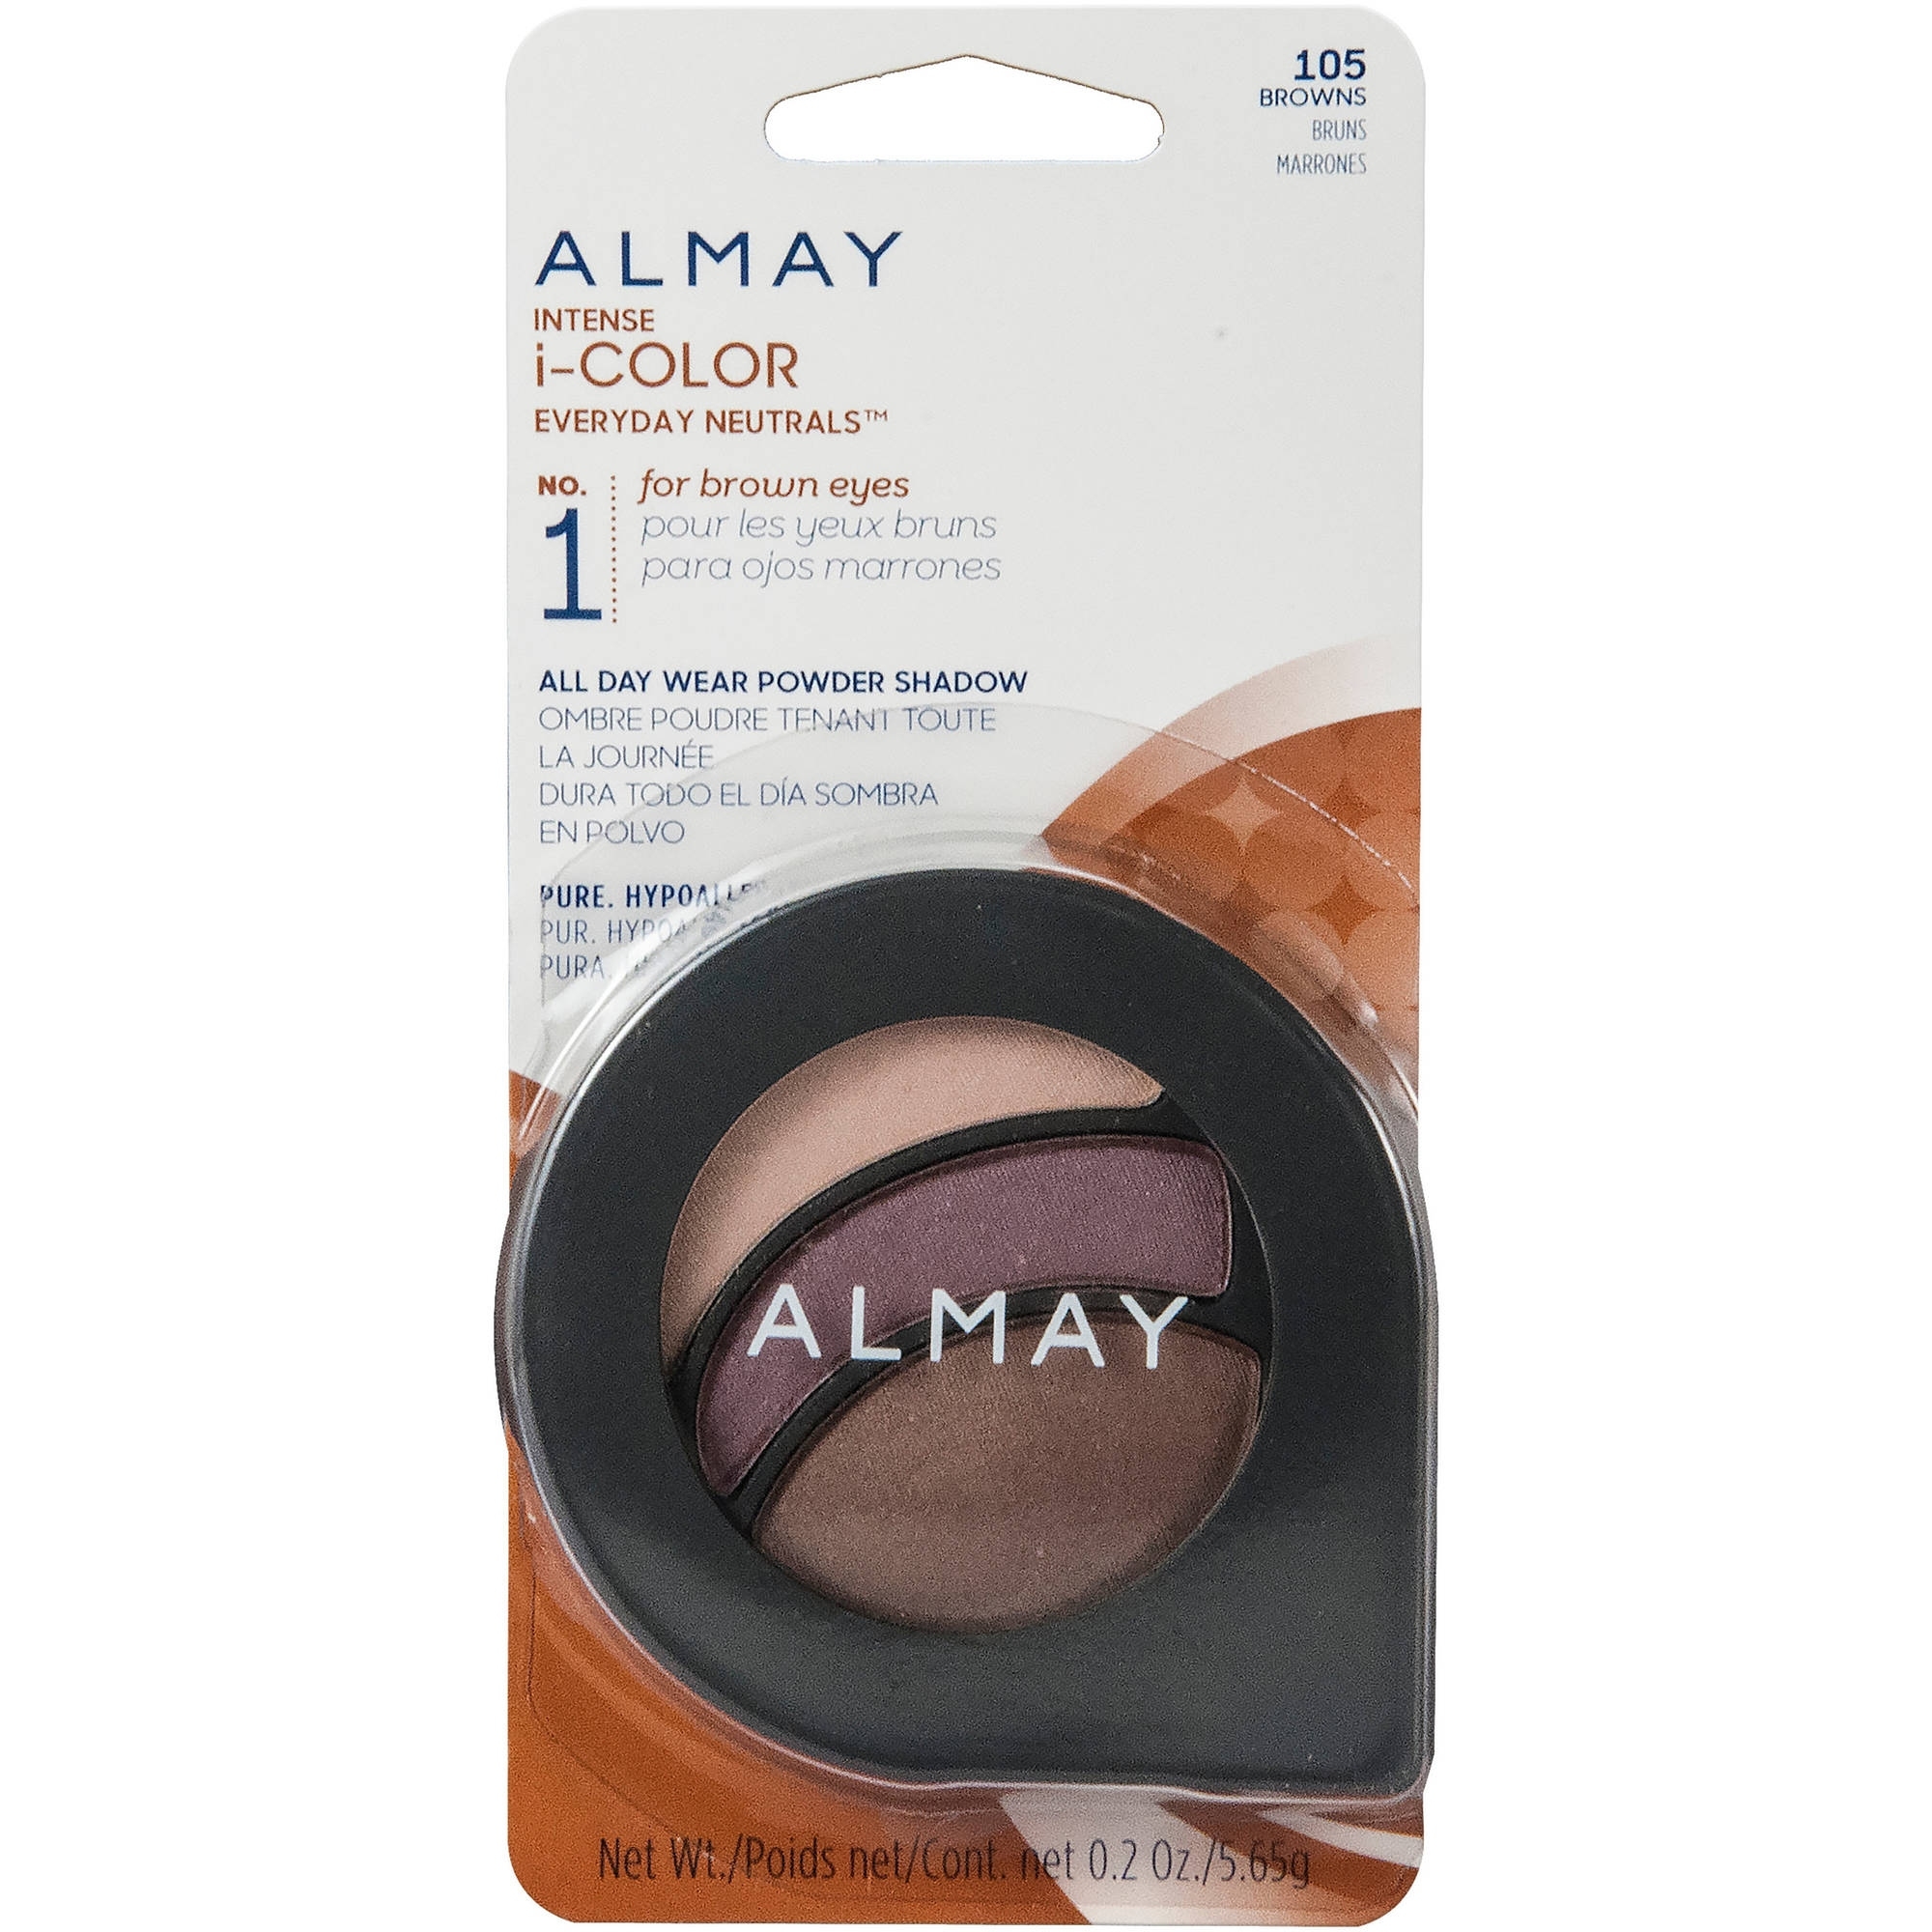 Almay Intense I-Color Everyday Neutrals All Day Wear Powder Eye in How To Apply Almay Intense I Color Eyeshadow For Hazel Eyes